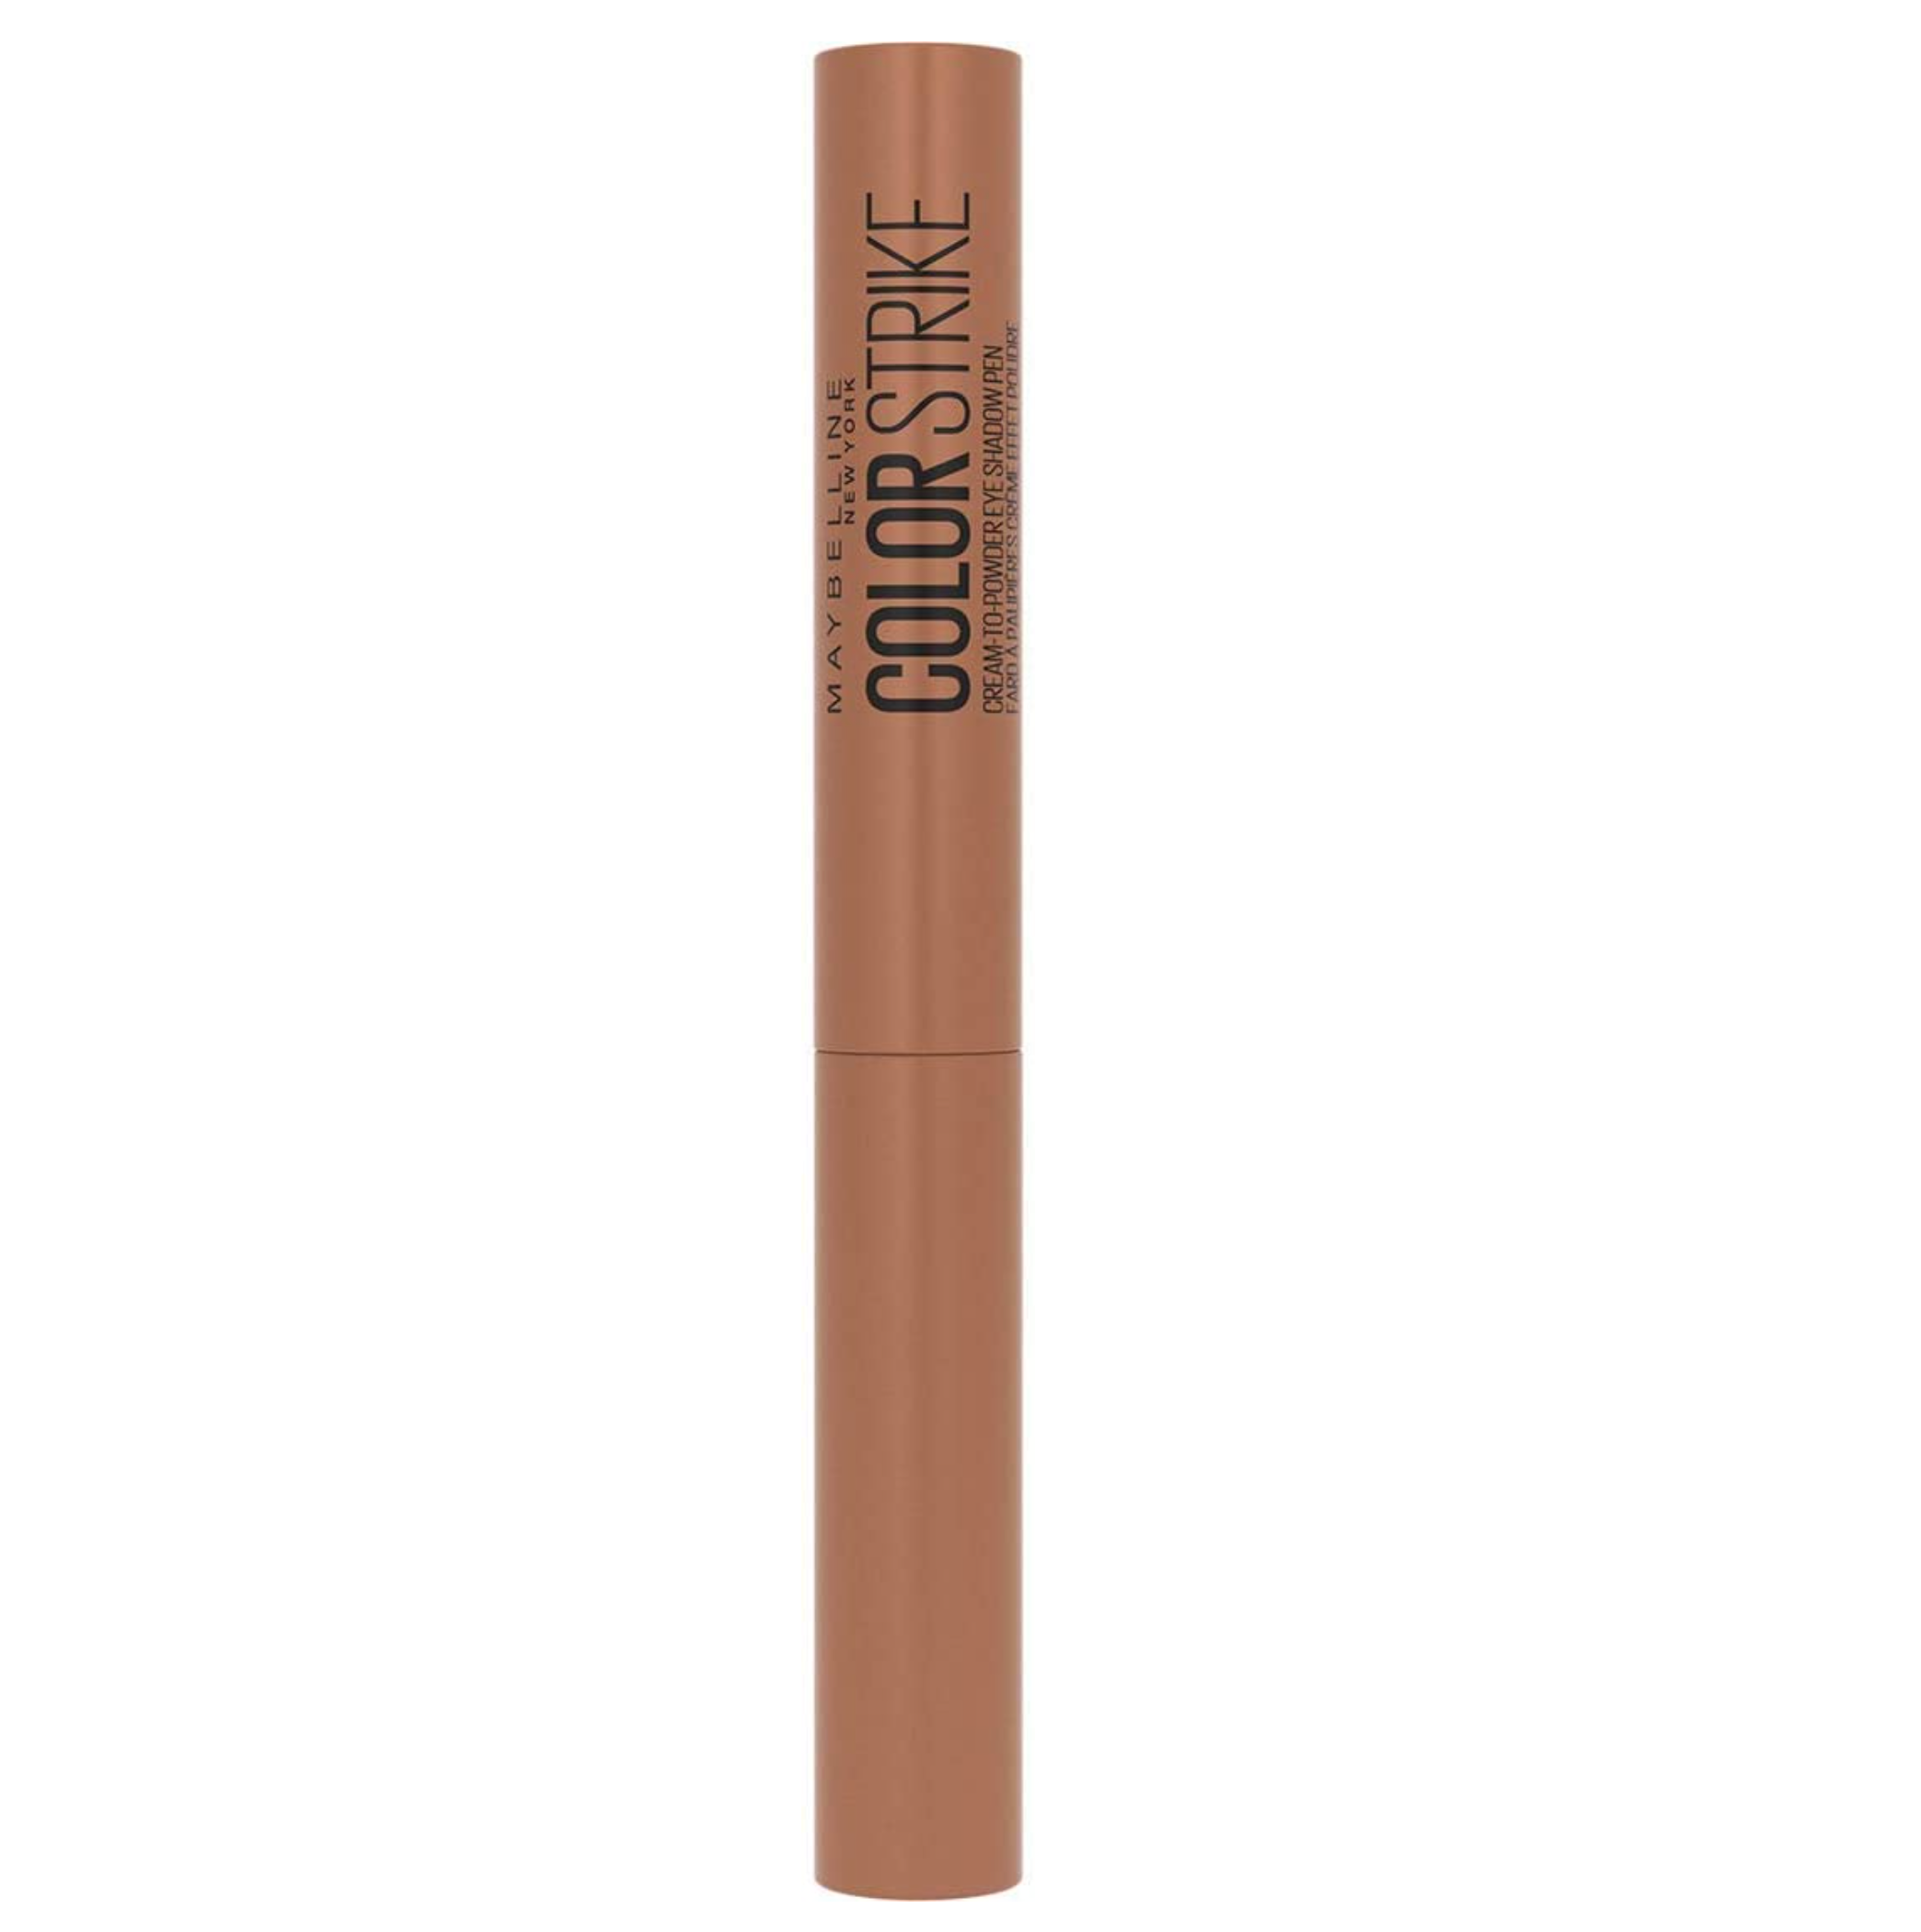 Maybelline Color Strike Cream-To-Powder Eye Shadow Pen - 45 Chase